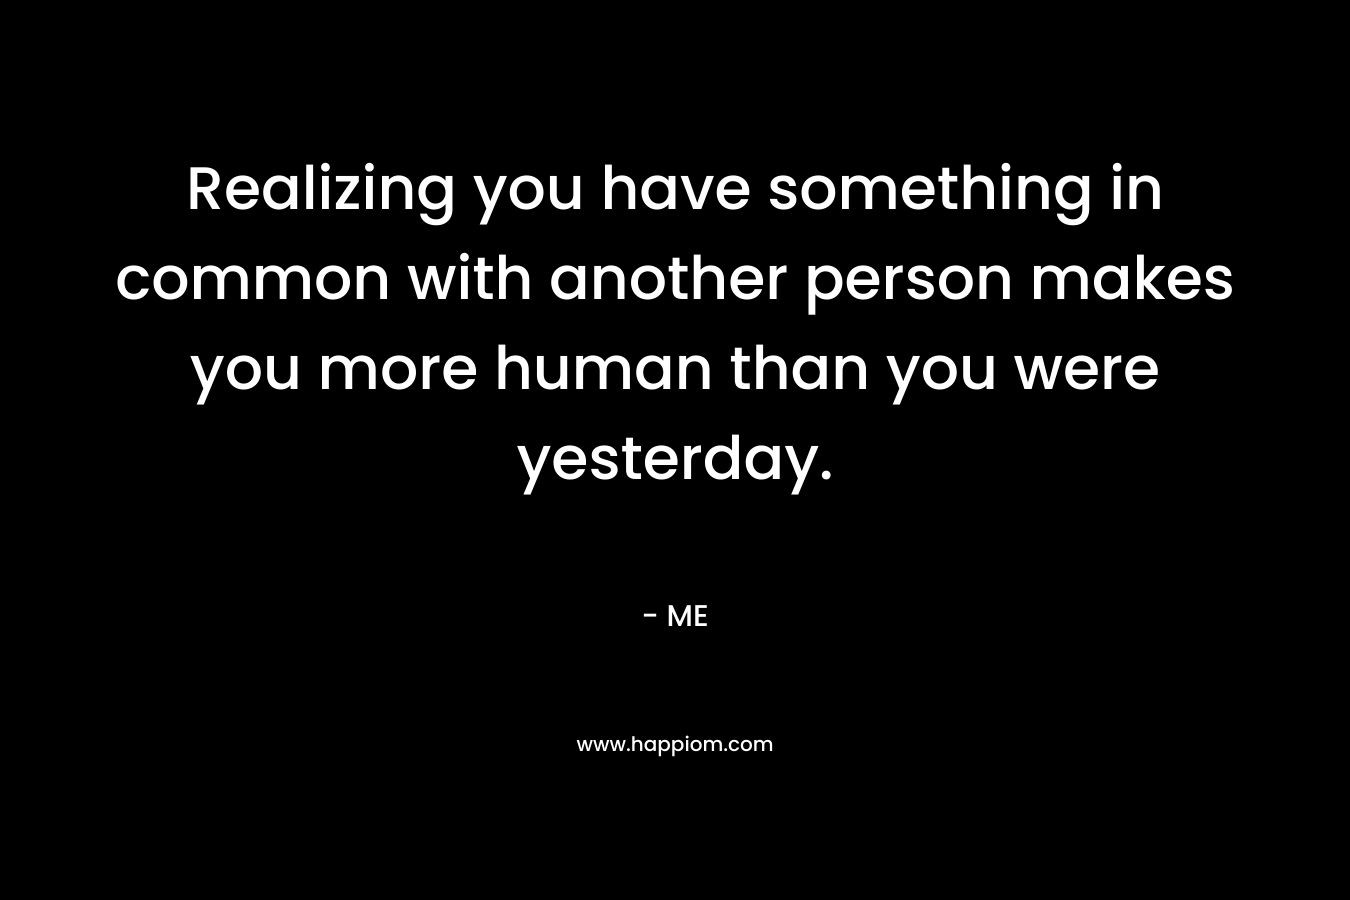 Realizing you have something in common with another person makes you more human than you were yesterday.